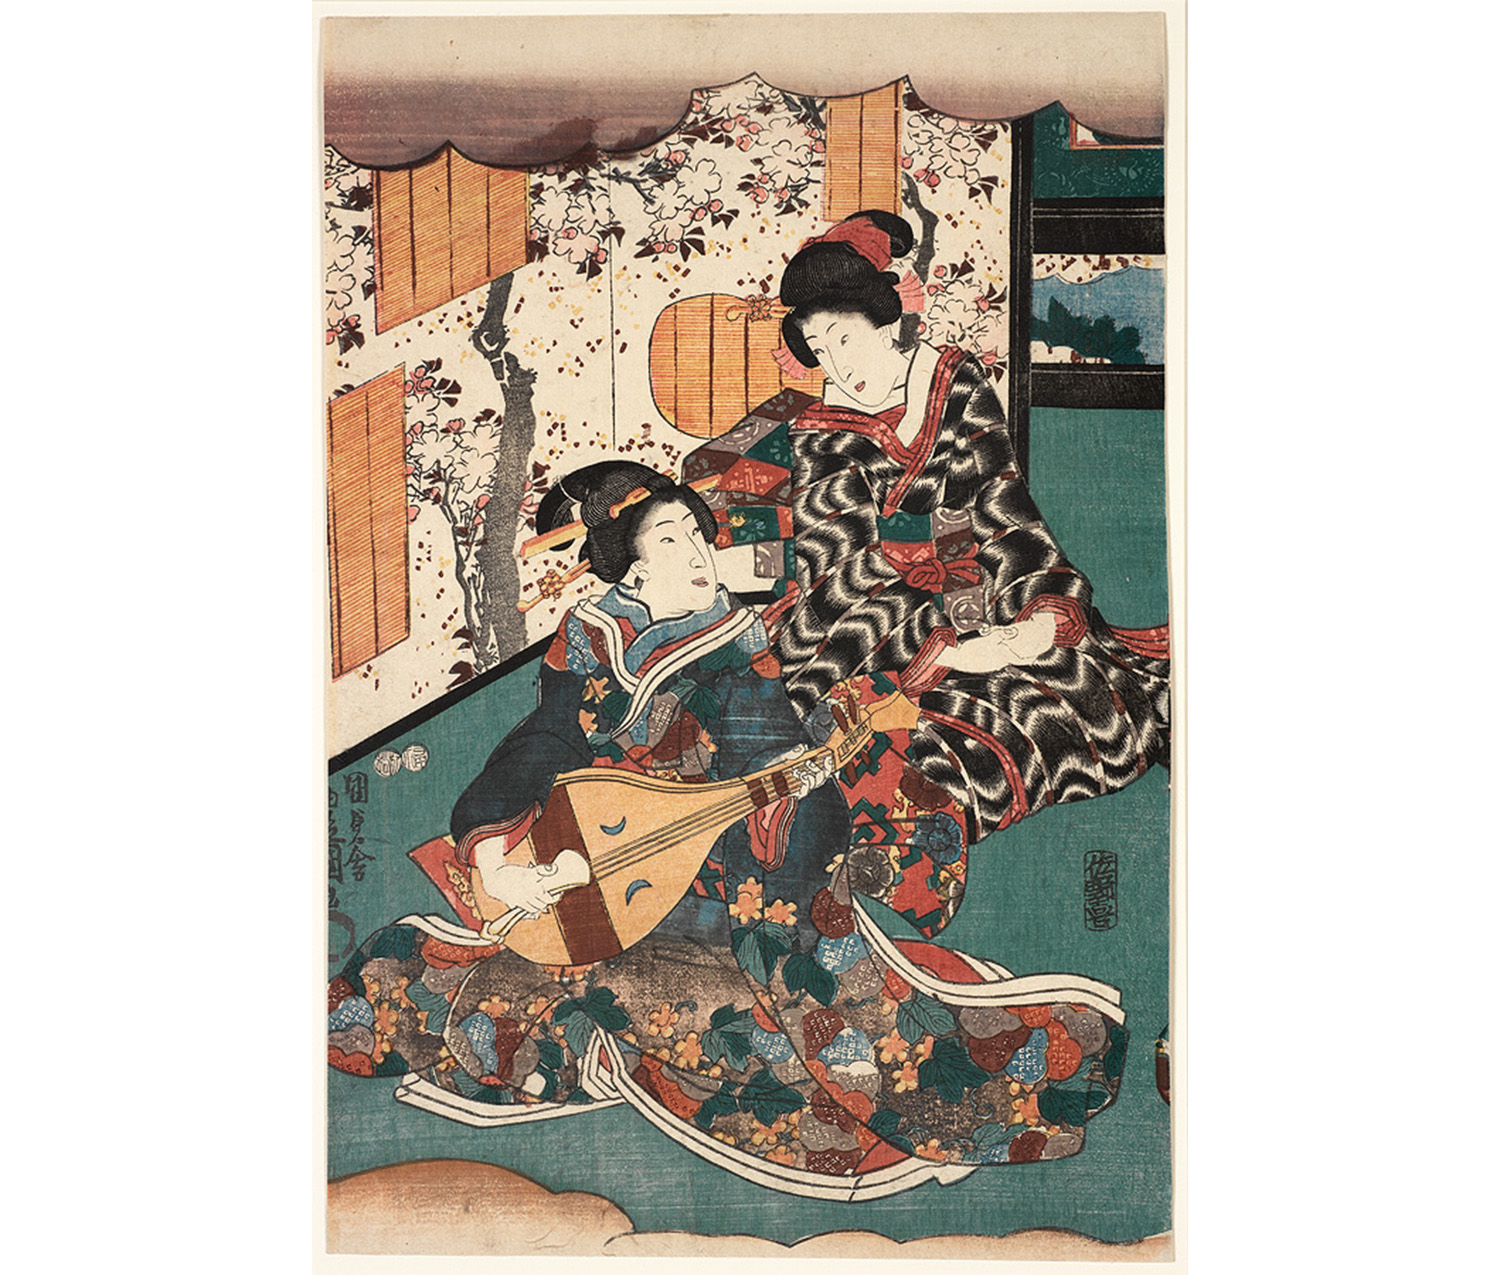 Woman seated on the floor dressed in elaborate kimono playing the biwa; second woman seated behind with hands clasped in her lap observing; folding screen of blossoming cherry trees in upper left behind women; top and bottom of print framed with clouds